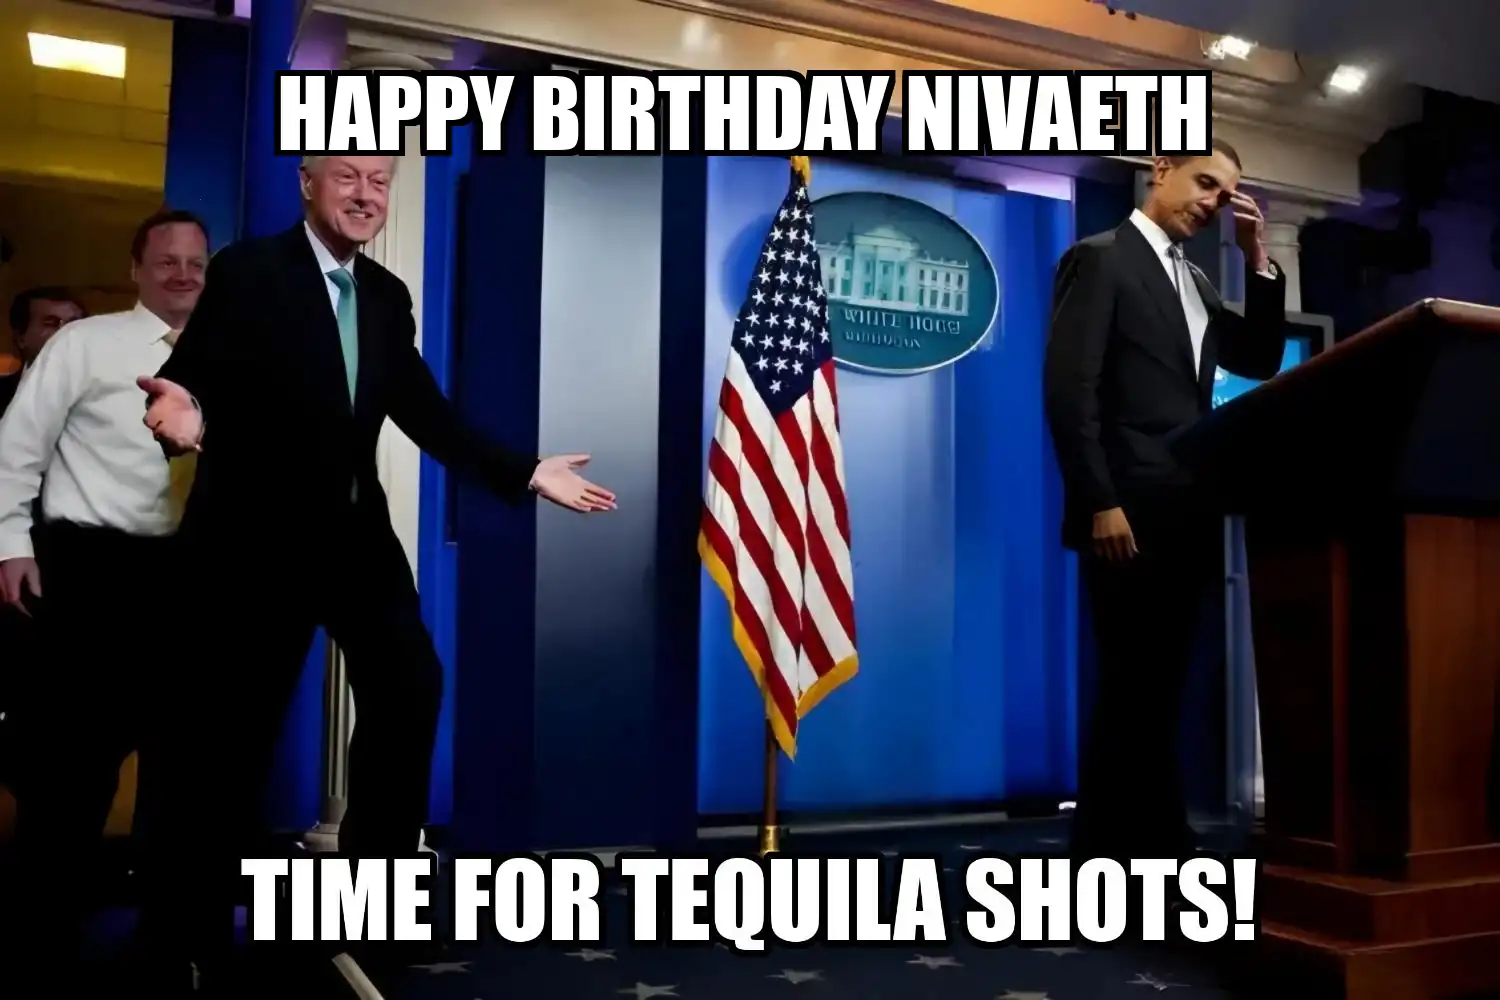 Happy Birthday Nivaeth Time For Tequila Shots Memes